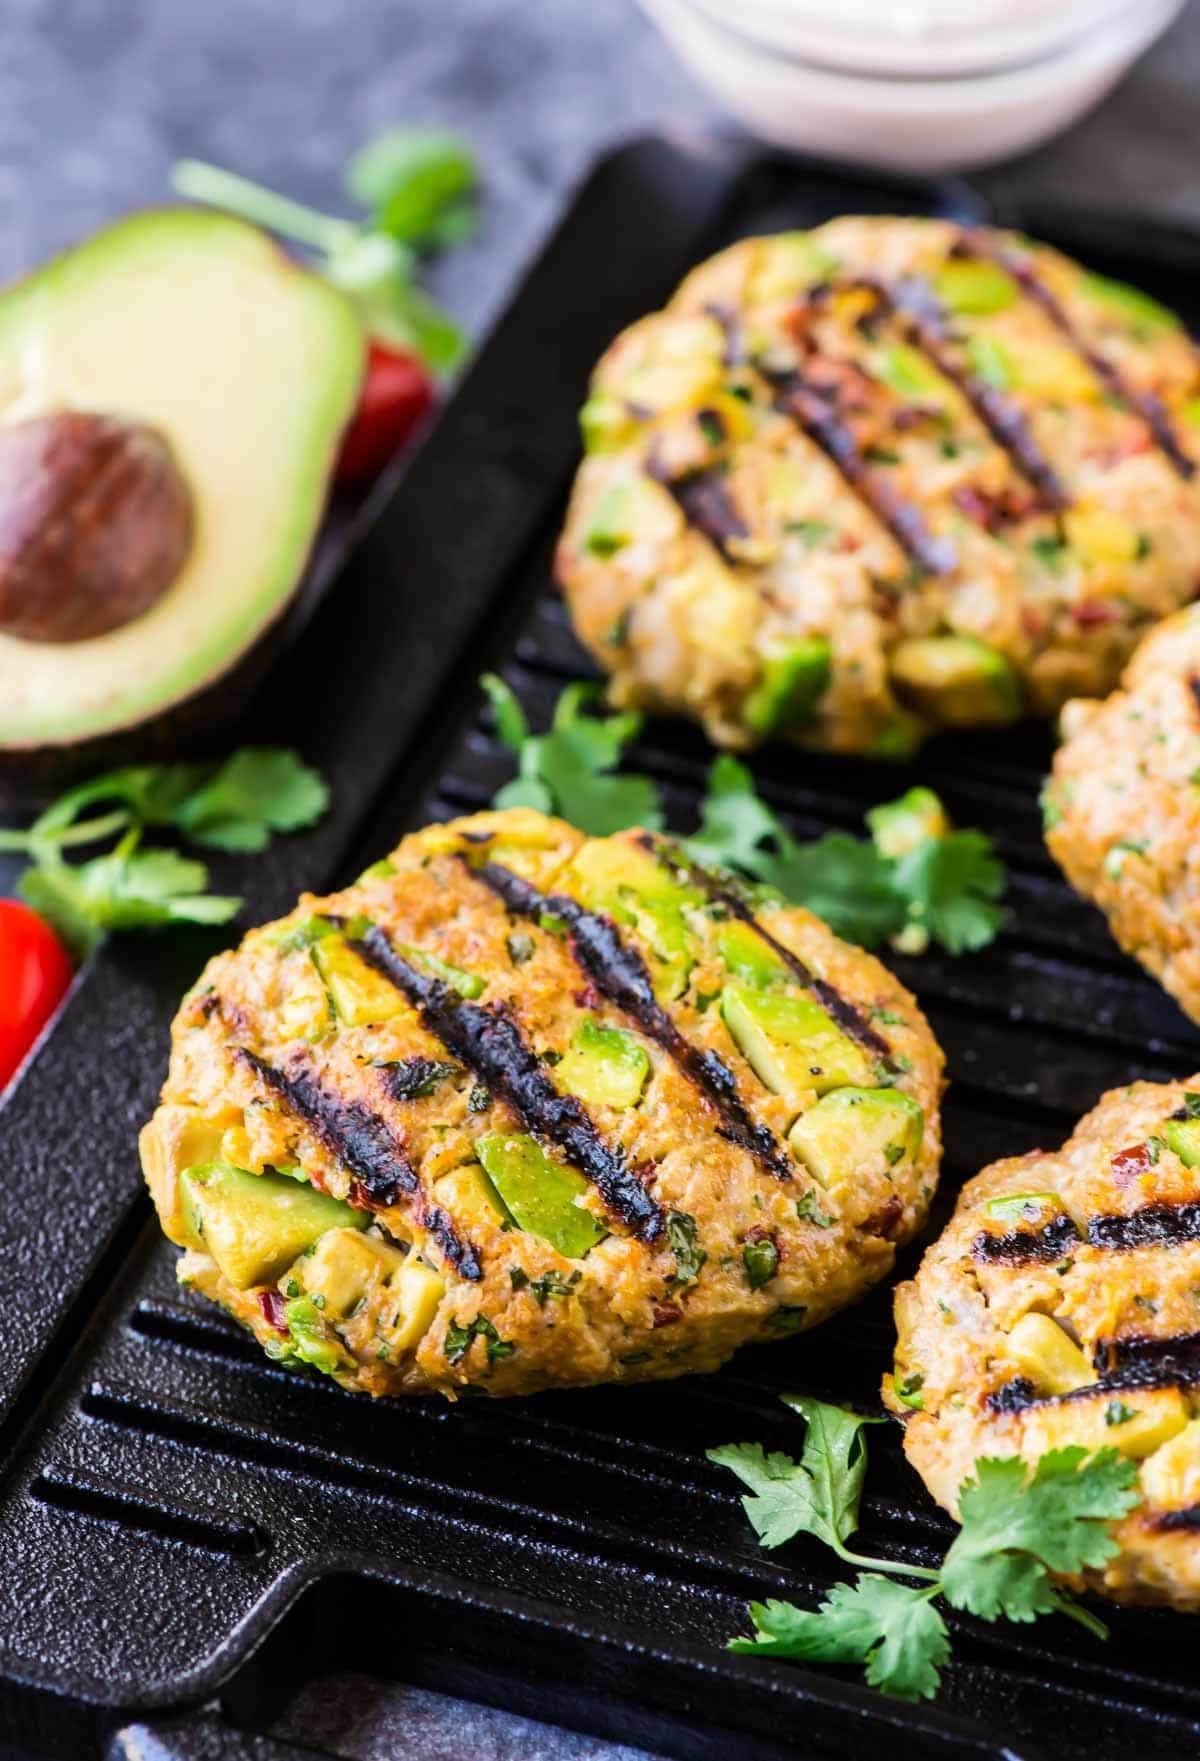 Patty with avocado slices on a grill pan.
